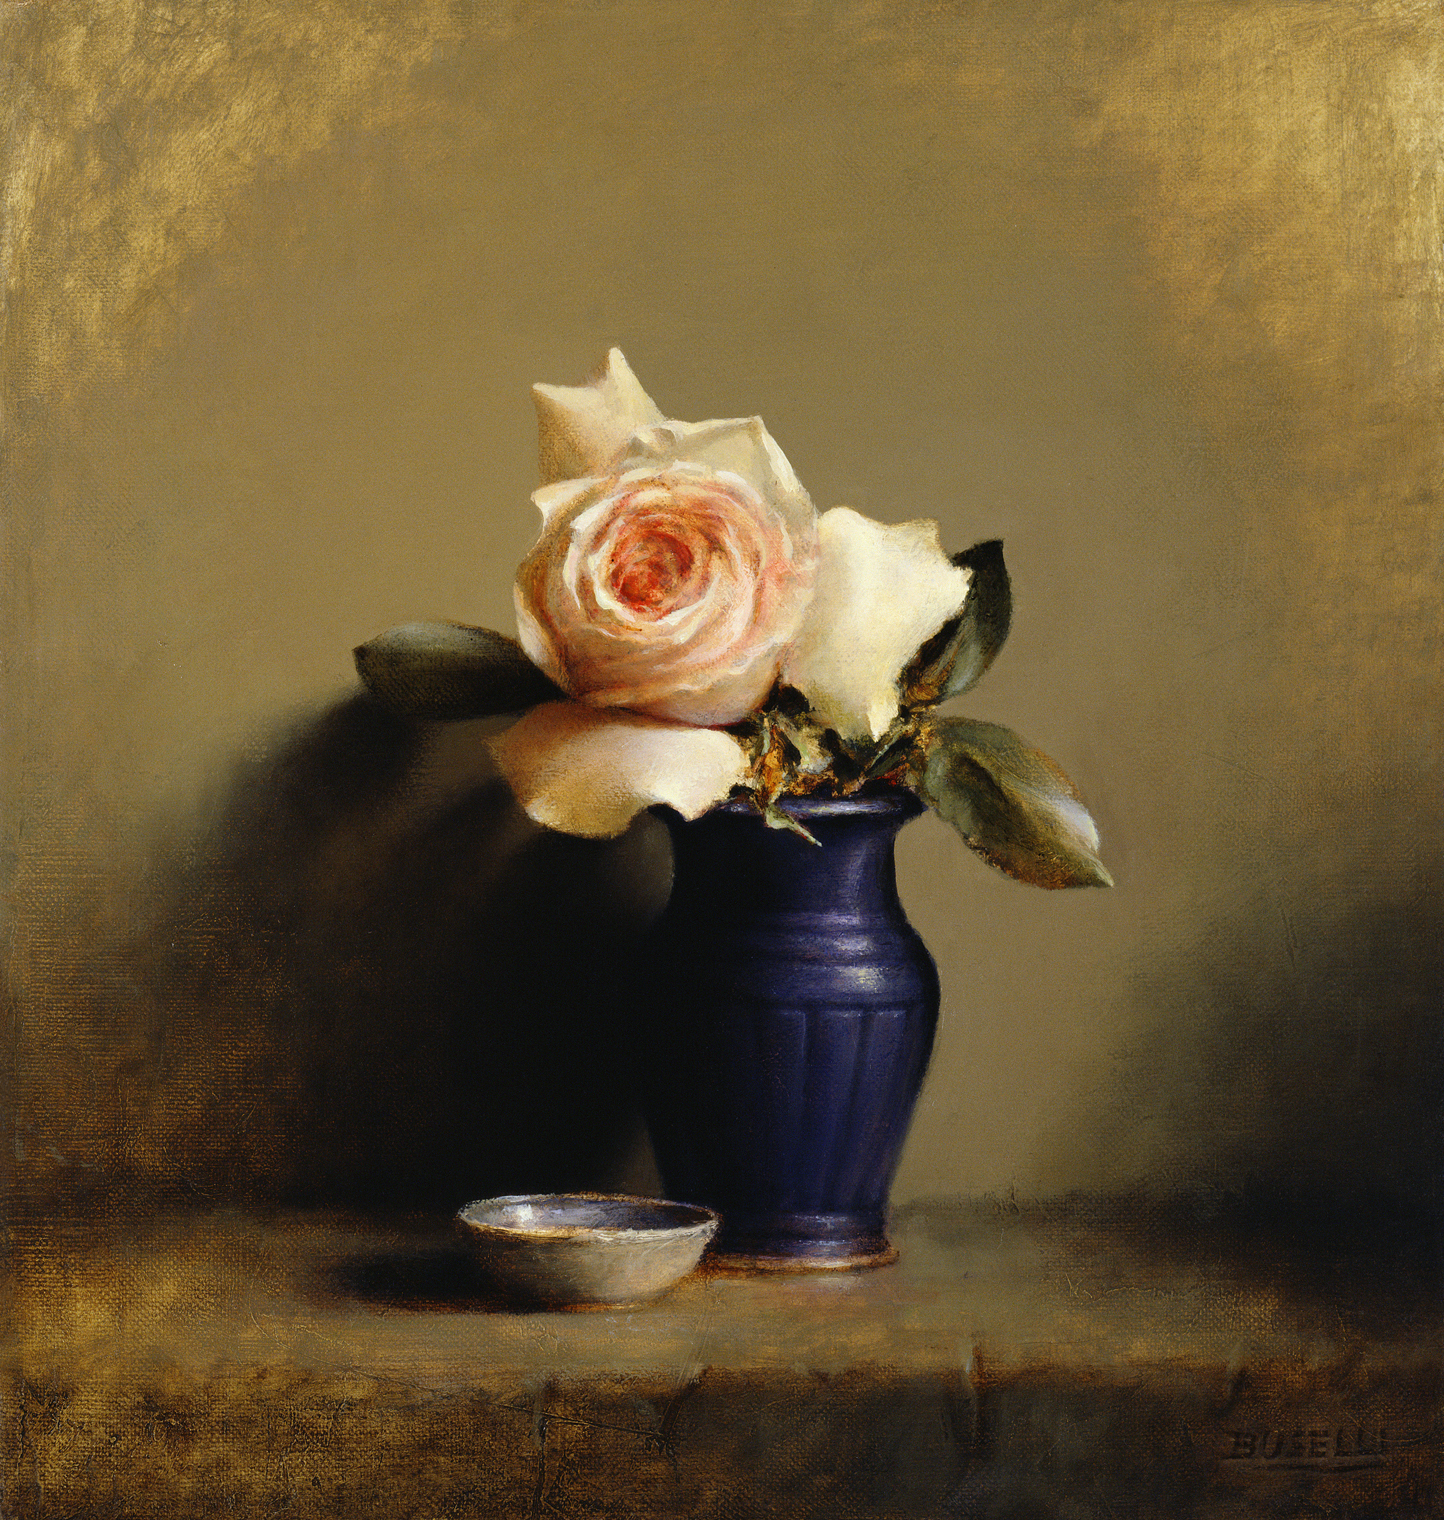   STUDY OF A ROSE    BEST IN SHOW | AMERICAN WOMEN ARTISTS   oil on linen | 16" x 15" 